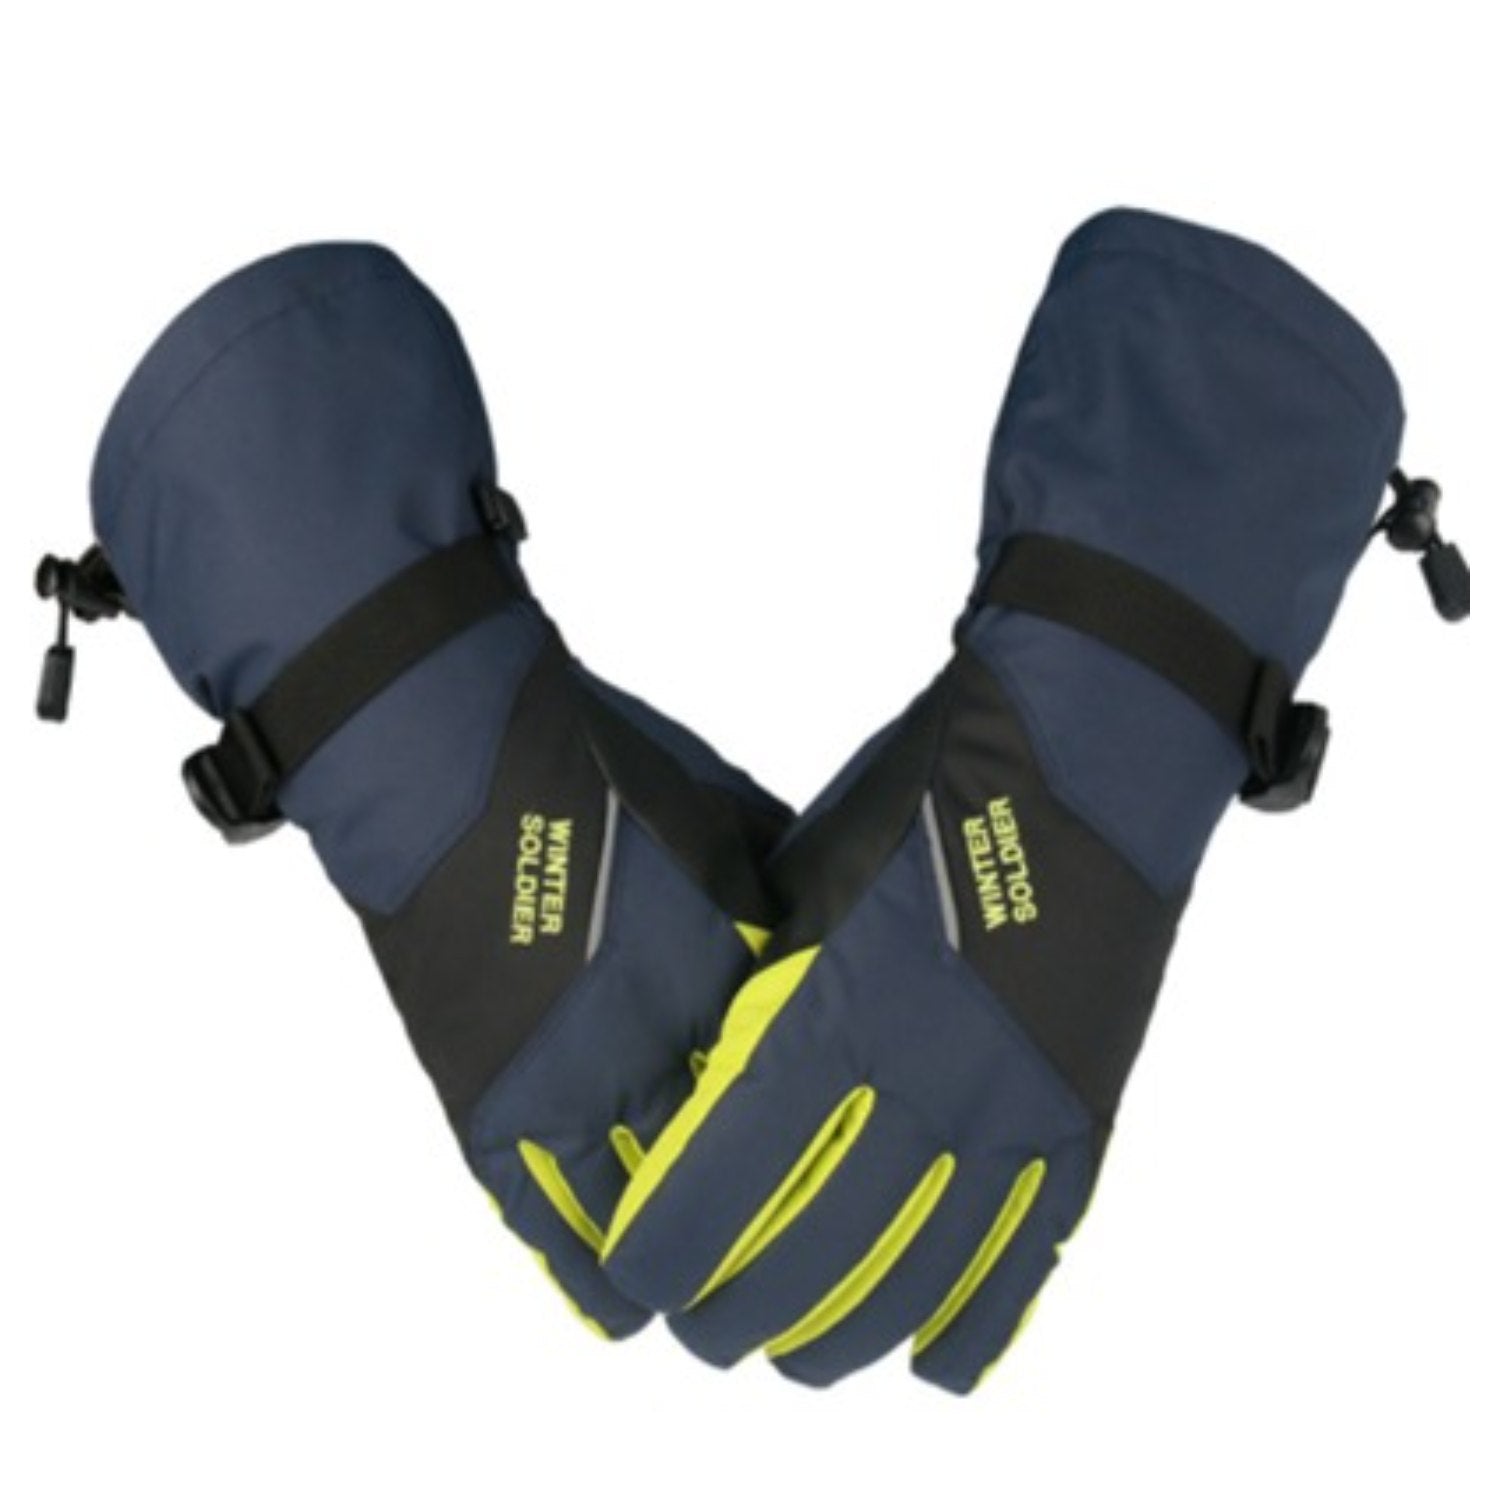 Buy Gokyo K2 Extreme Cold Weather Gloves Blue Yellow | Cold Weather Gloves at Gokyo Outdoor Clothing & Gear